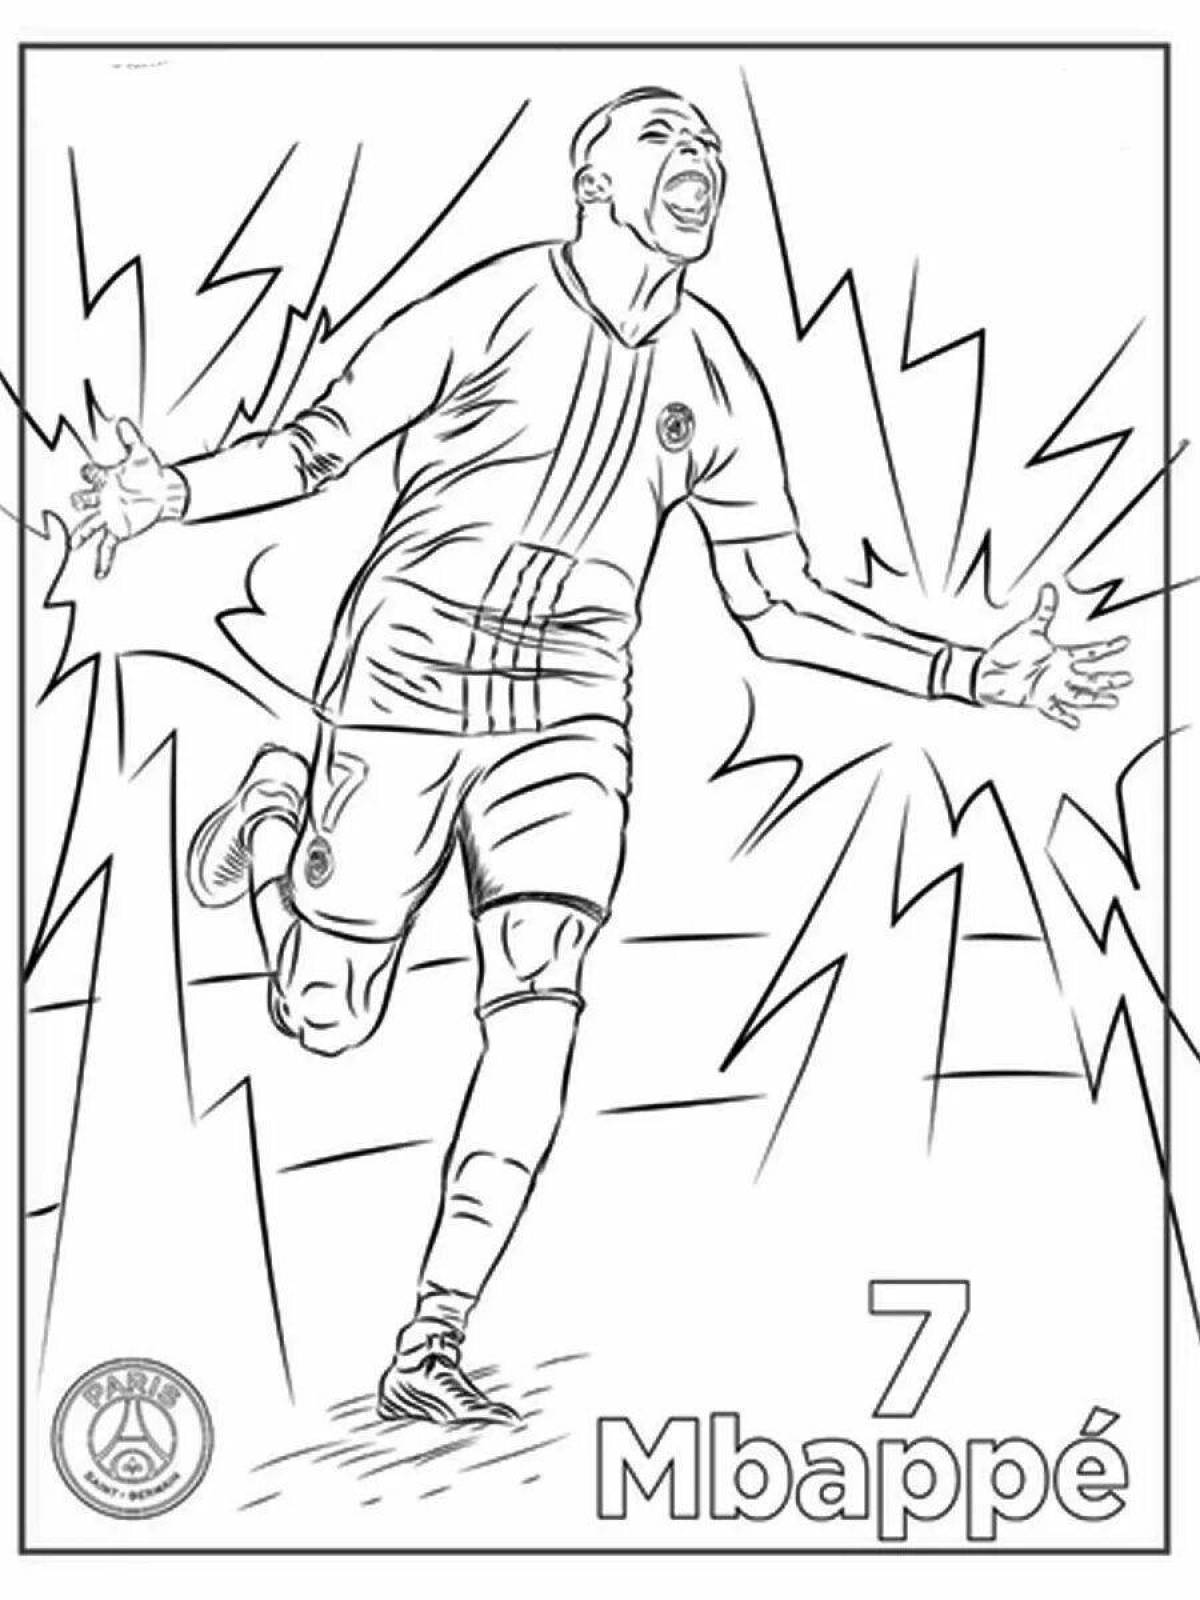 Colorful psg soccer players coloring book